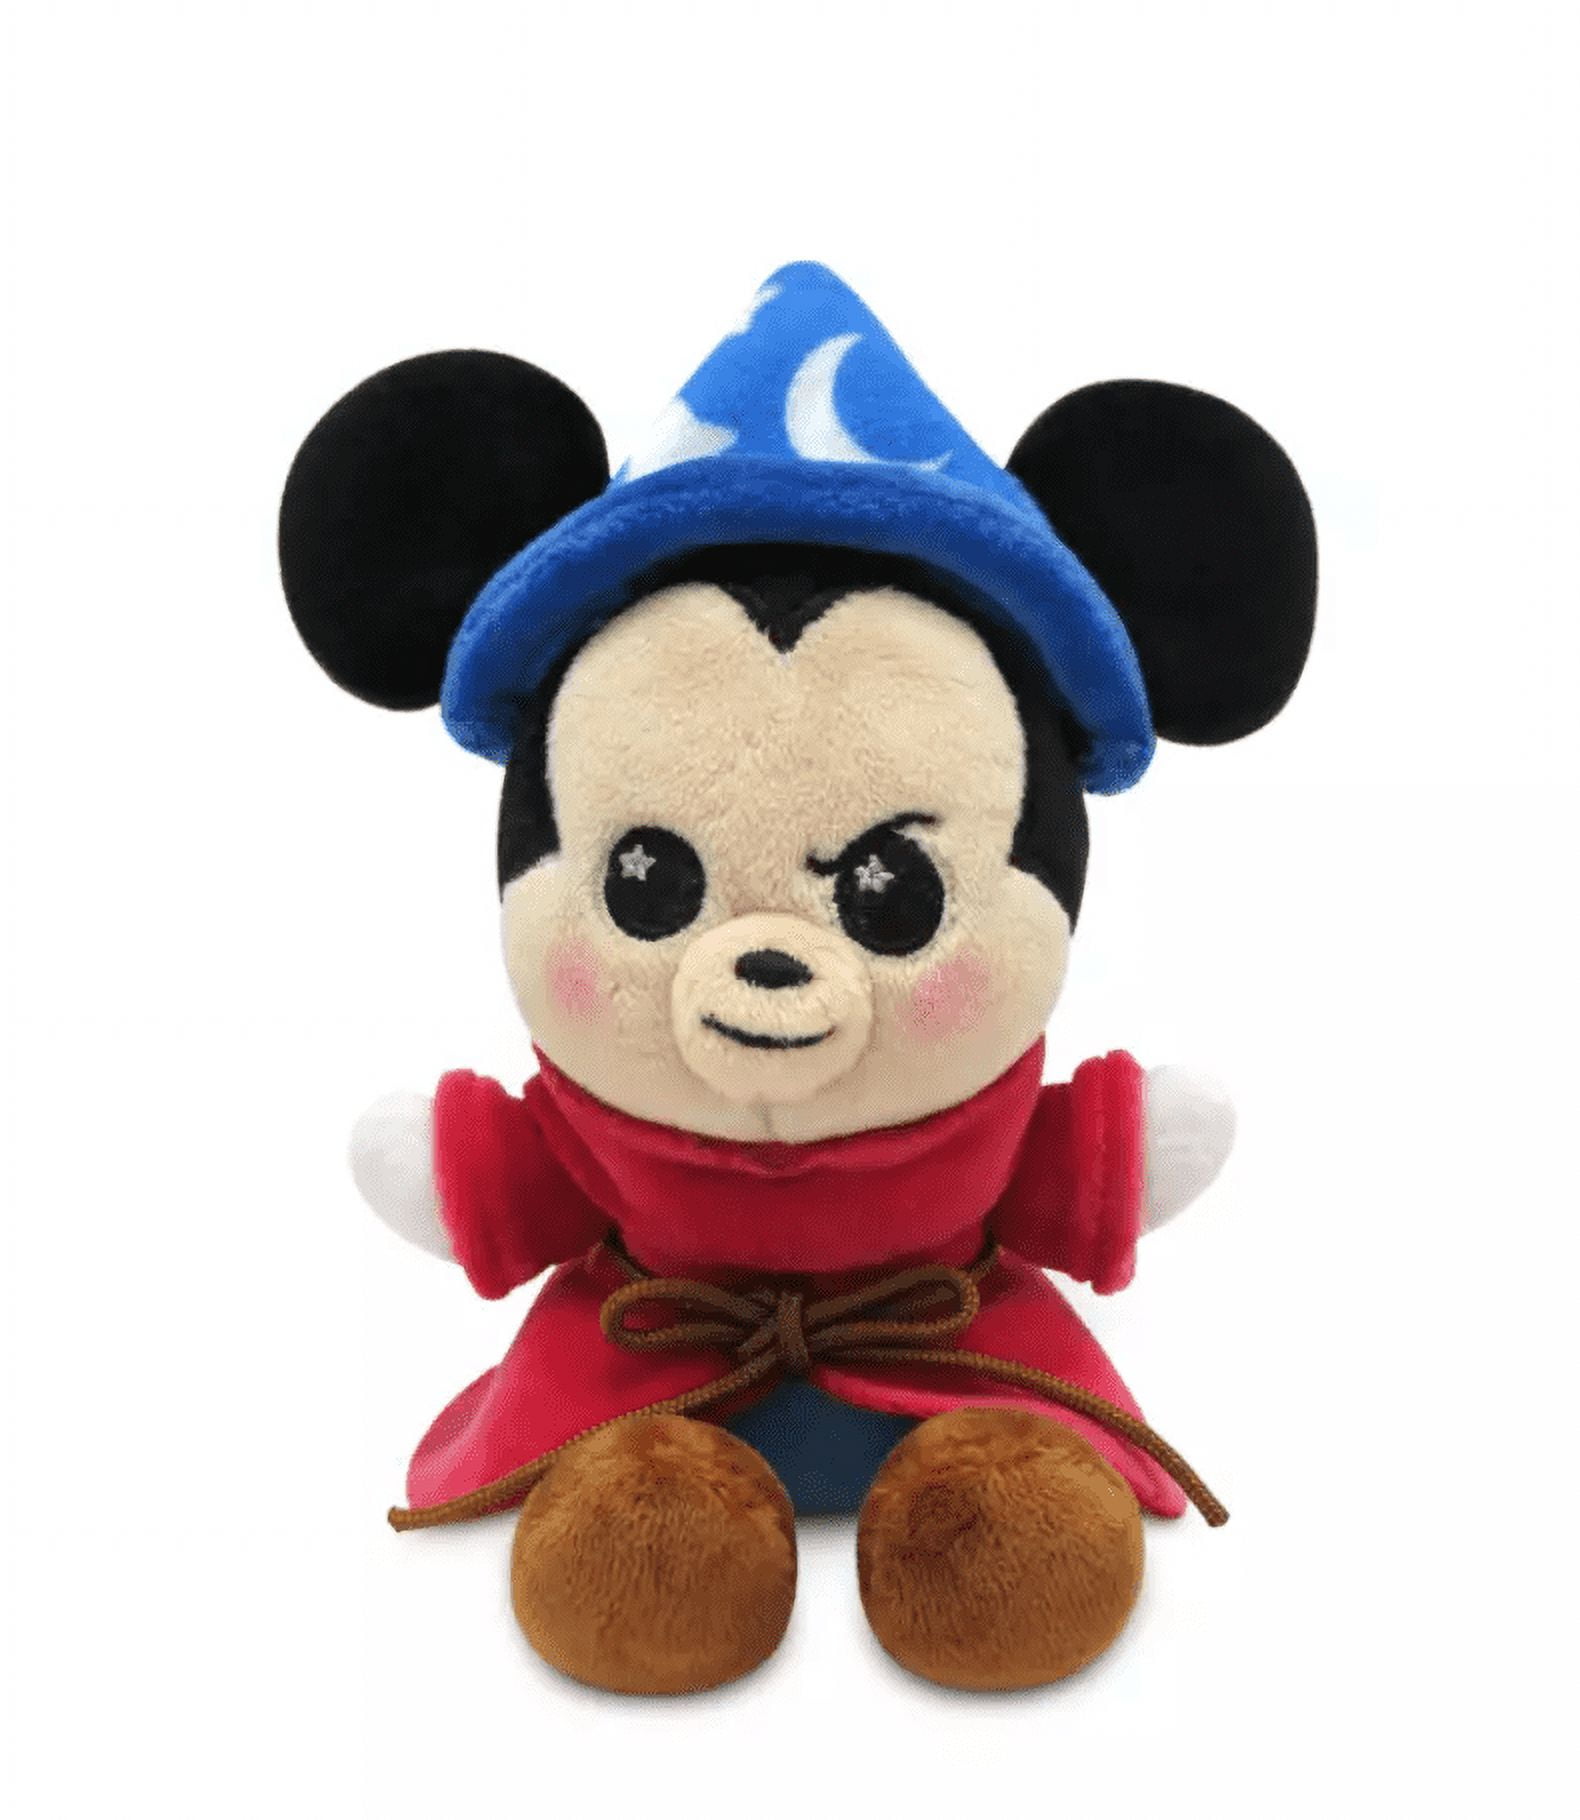 Disney Store Official Fantasia Collection: Medium 22-Inch Sorcerer Mickey  Mouse Plush - Authentic, Soft & Cuddly Toy - Ideal for Fans & Kids